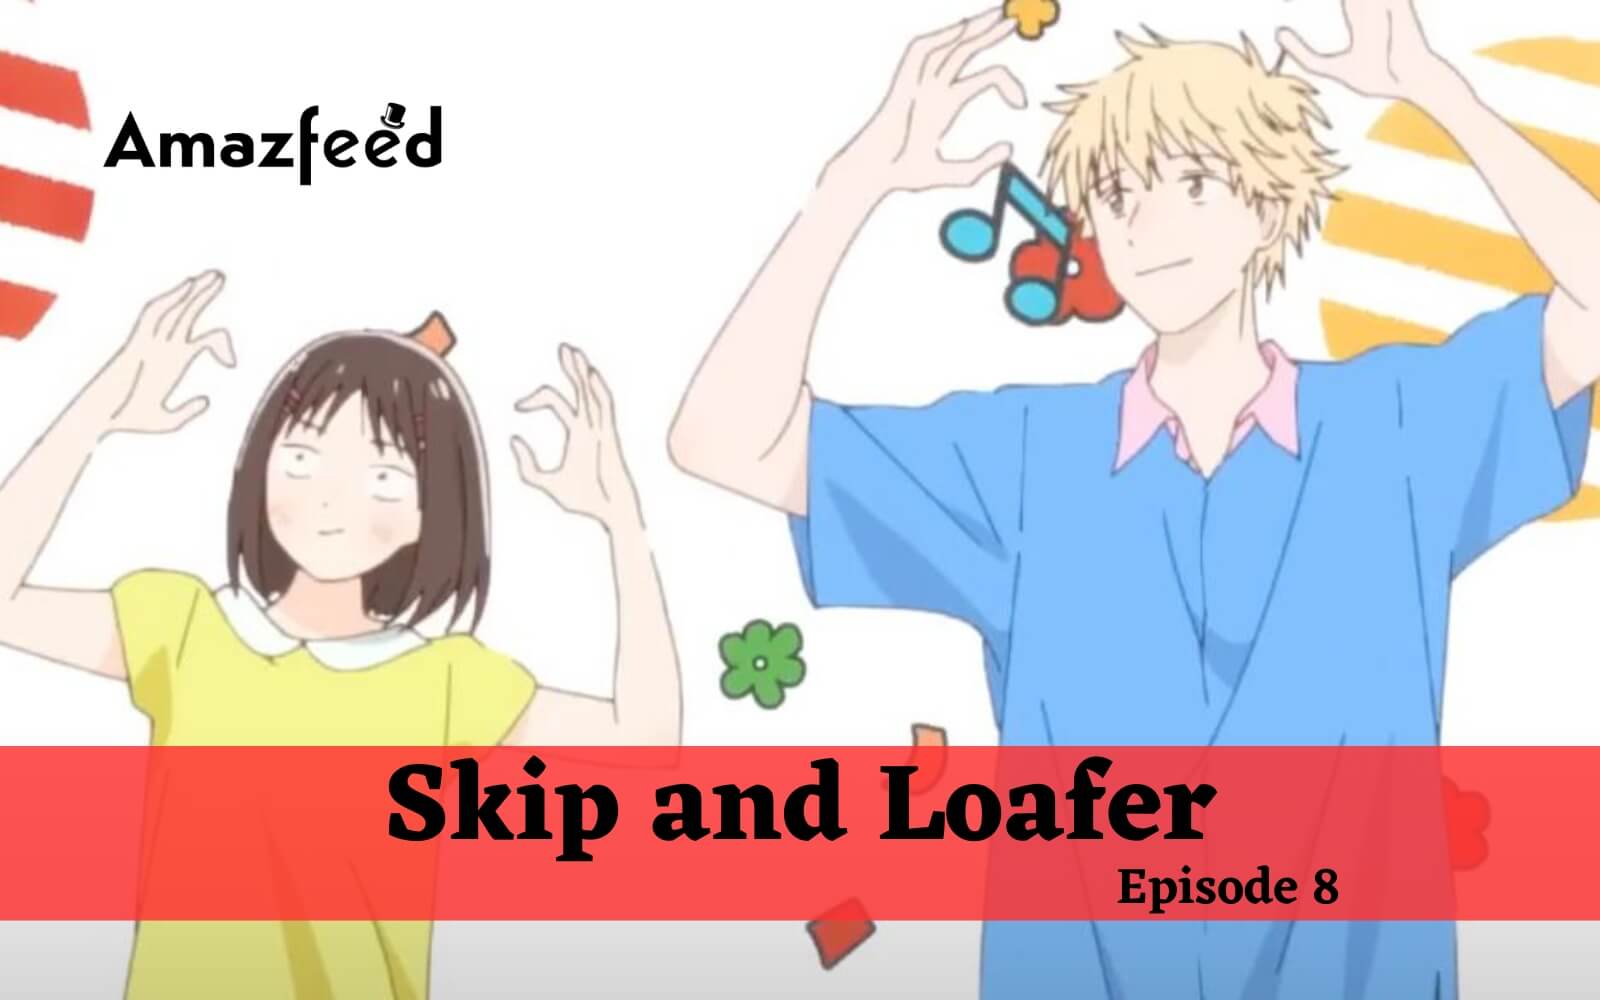 Skip and Loafer Season 1 - watch episodes streaming online